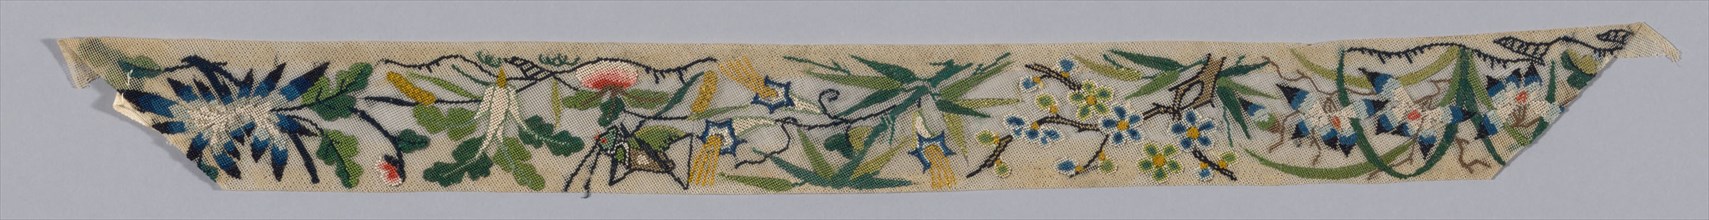 Trimming, China, Qing dynasty(1644-1911), 1850/1900. Creator: Unknown.